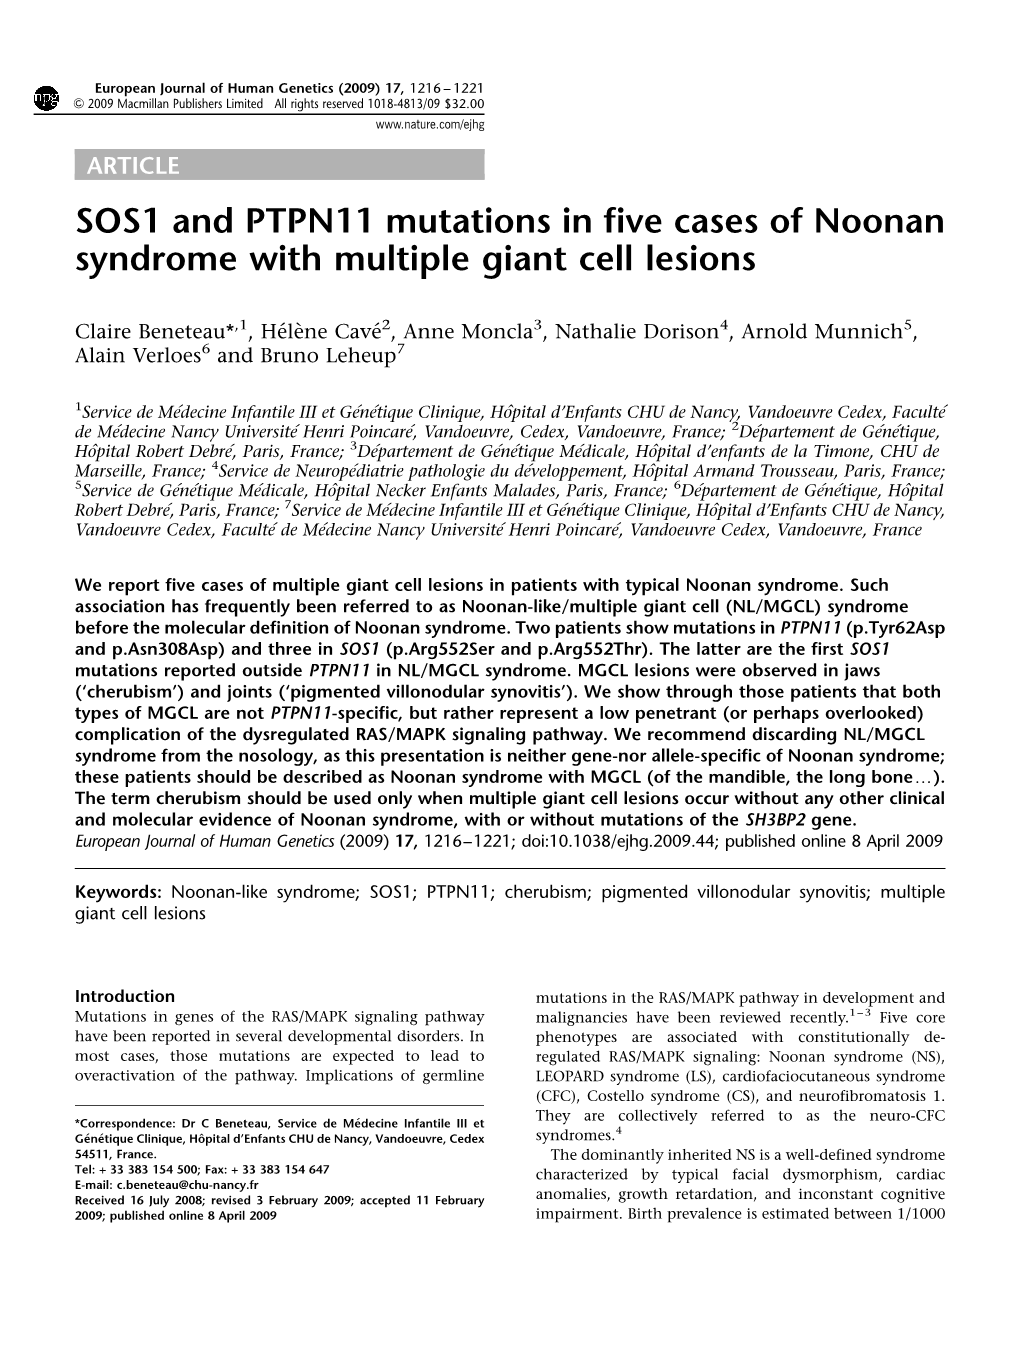 SOS1 and PTPN11 Mutations in Five Cases of Noonan Syndrome with Multiple Giant Cell Lesions